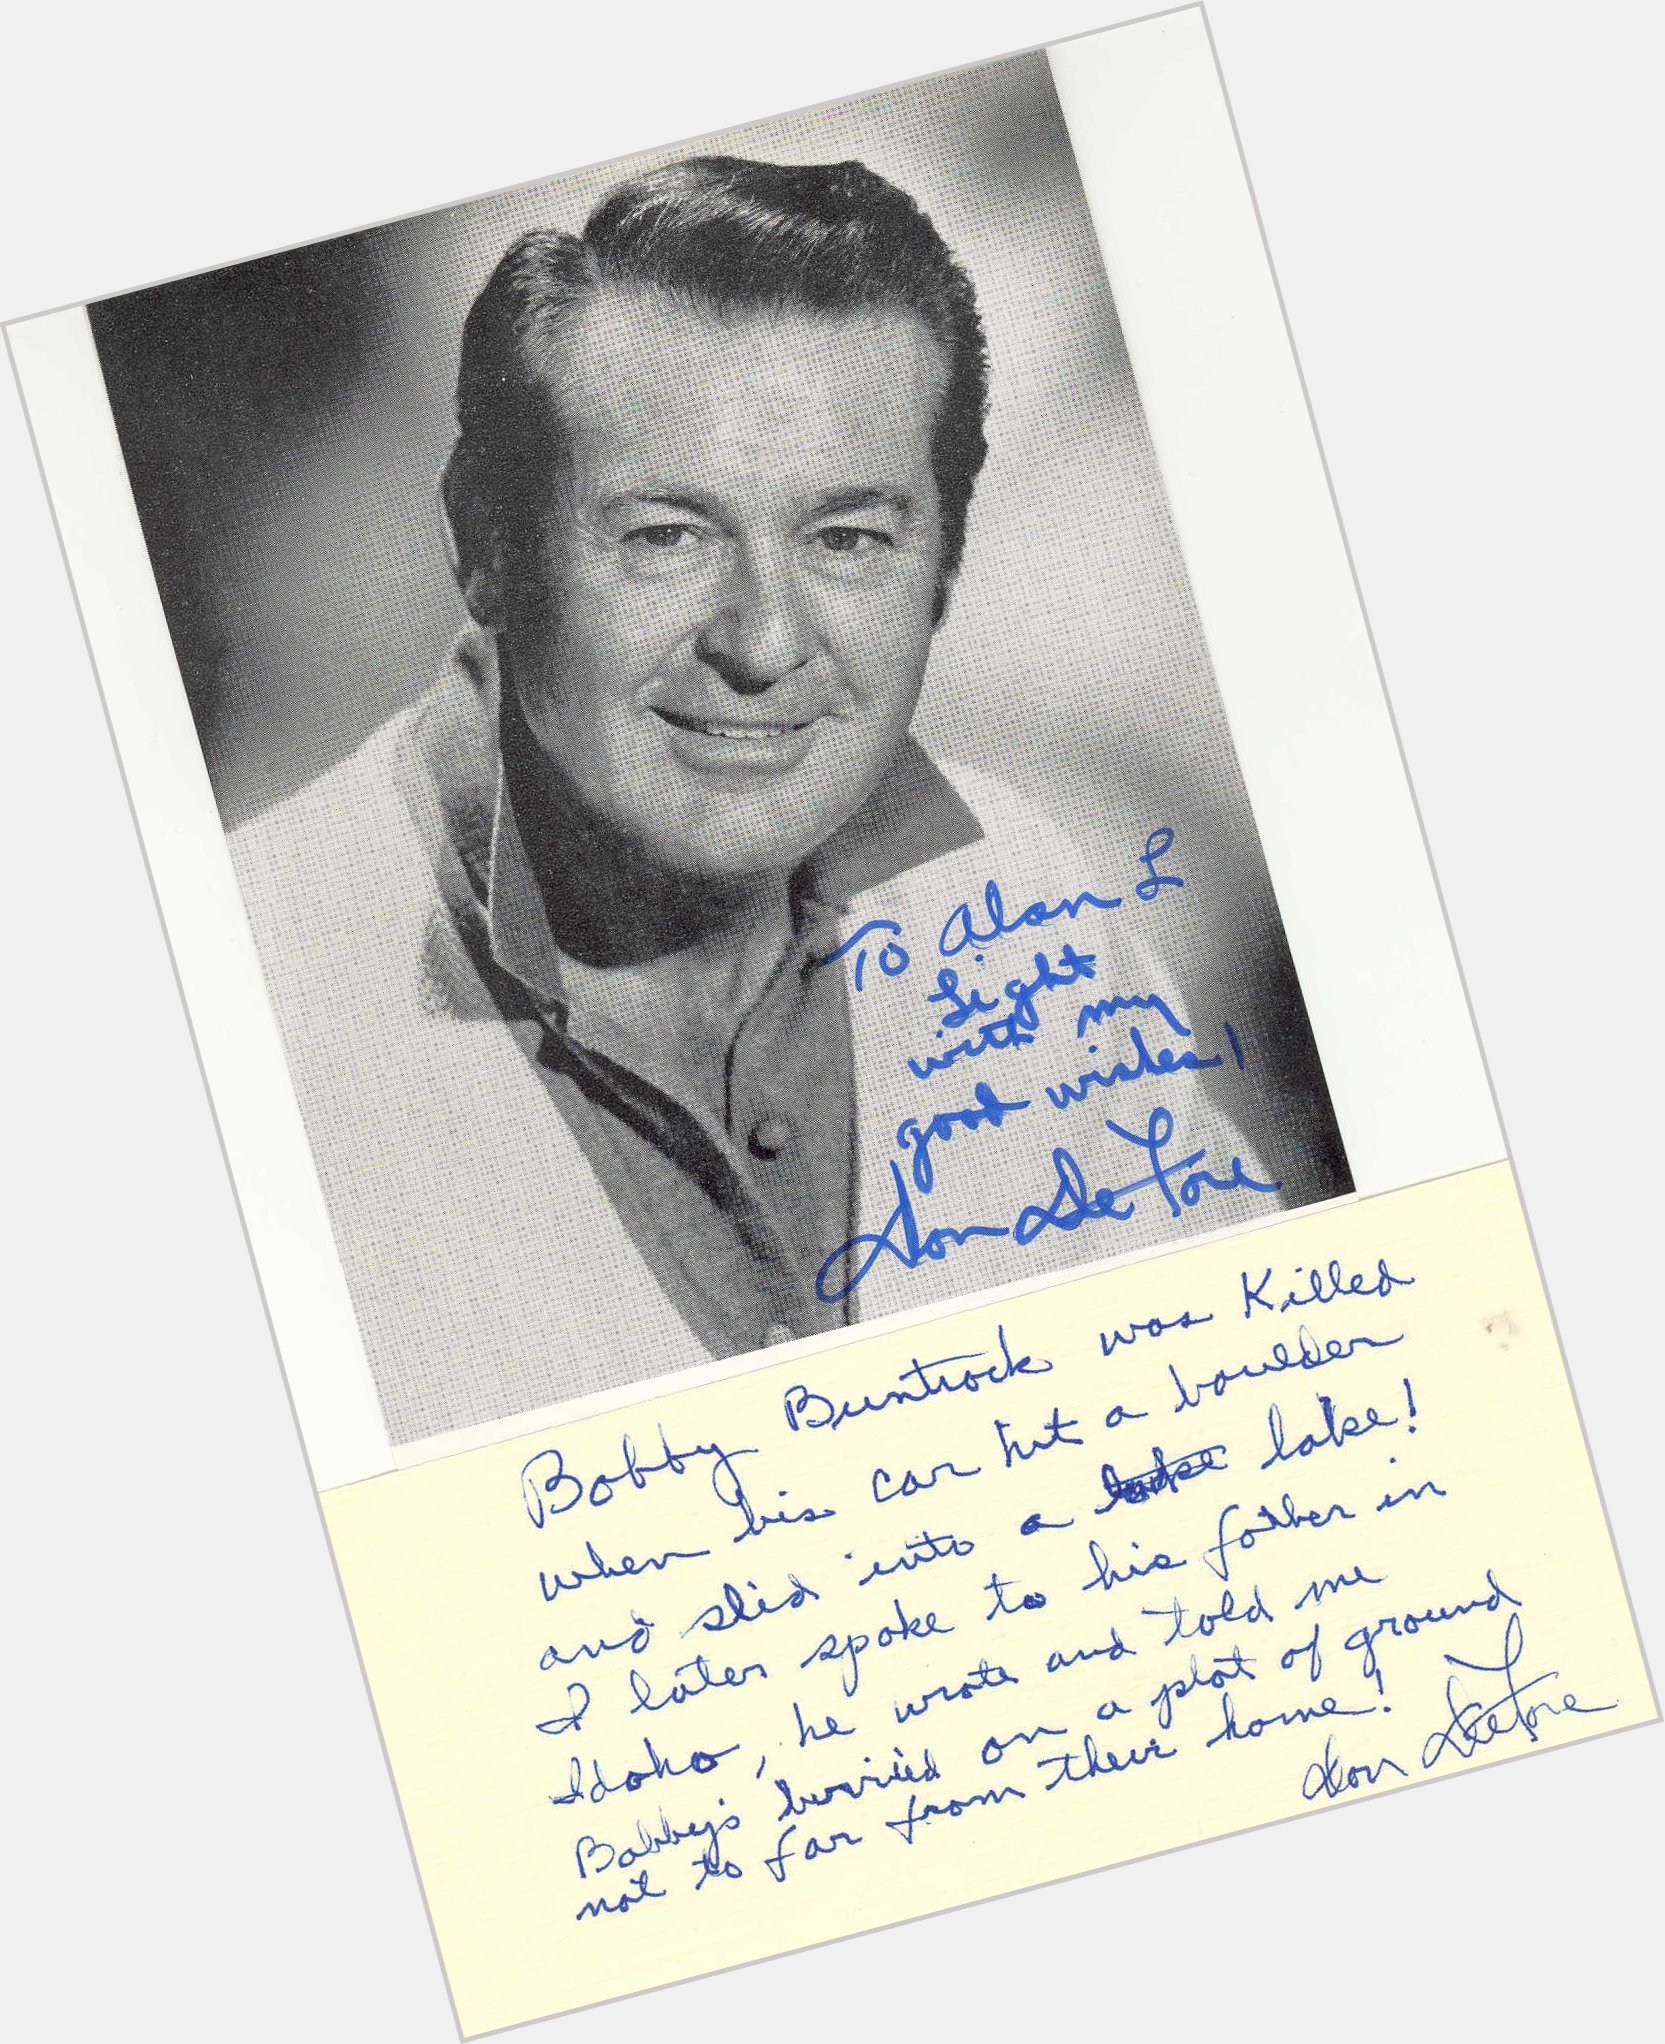 Don Defore Large body,  grey hair & hairstyles